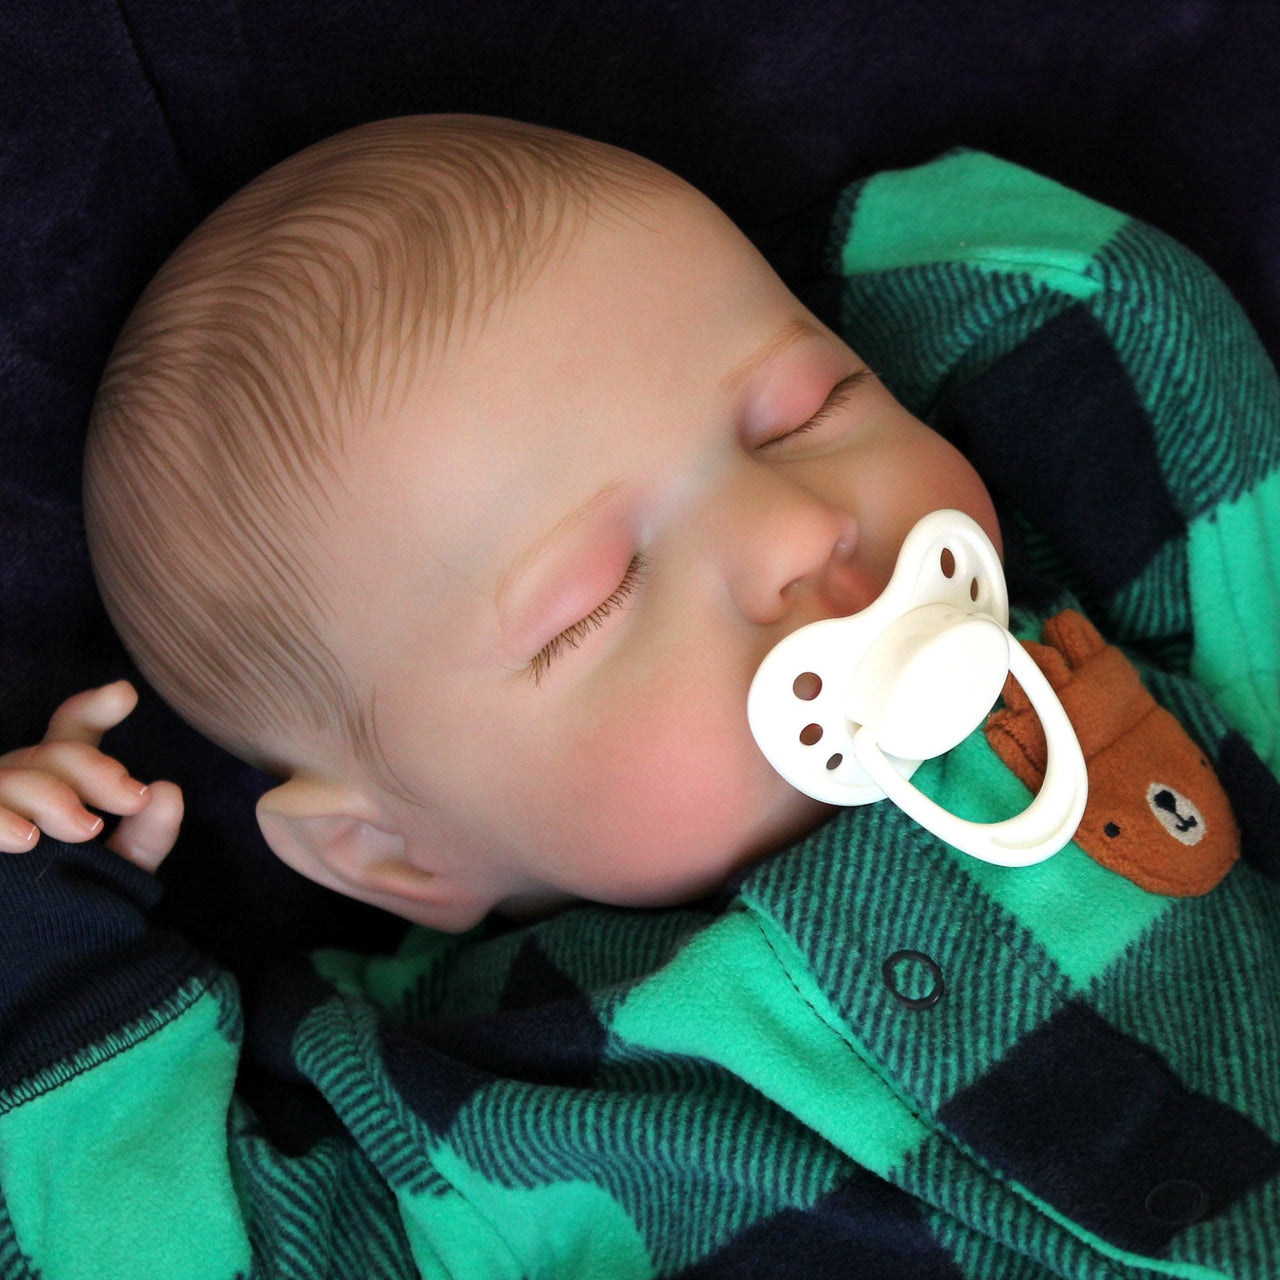 20" Reborn Therapy Baby Doll - Lifelike Weighted Newborn Plaid Christmas Outfit, Child-Friendly, Ideal for Realistic Play, Unique Xmas Gift